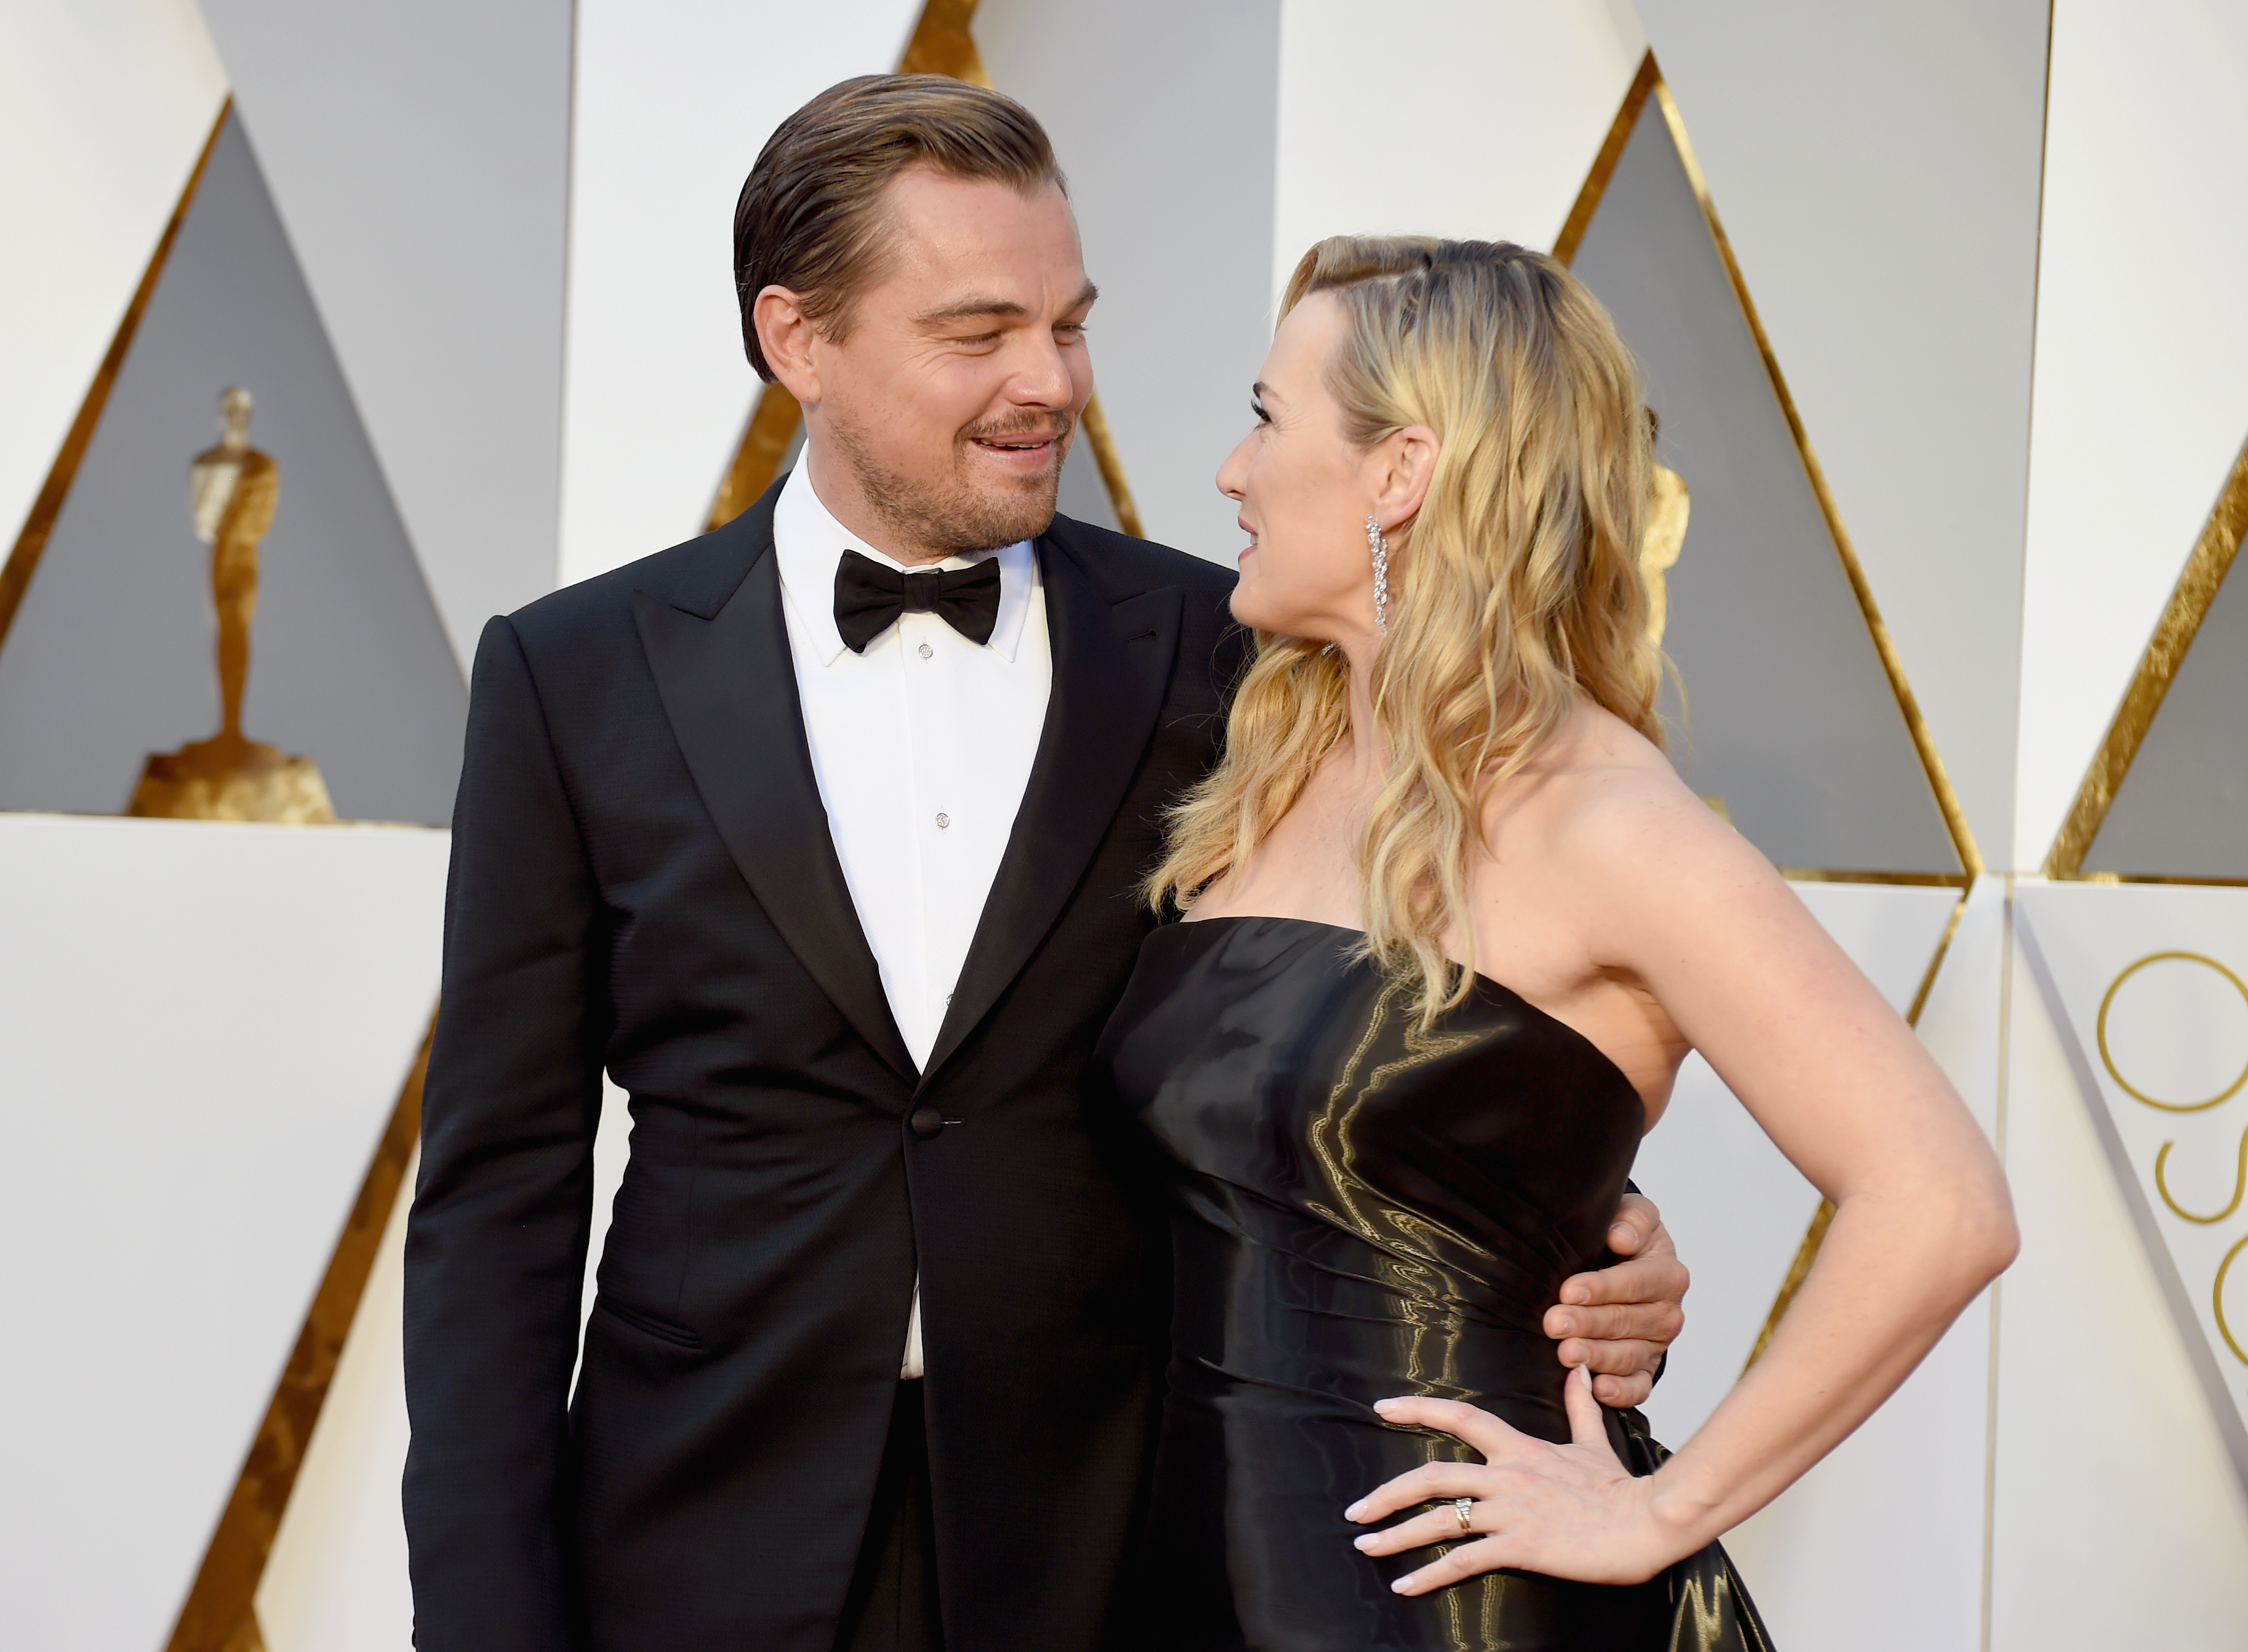 Leo and Kate smiling at each other at the Oscars